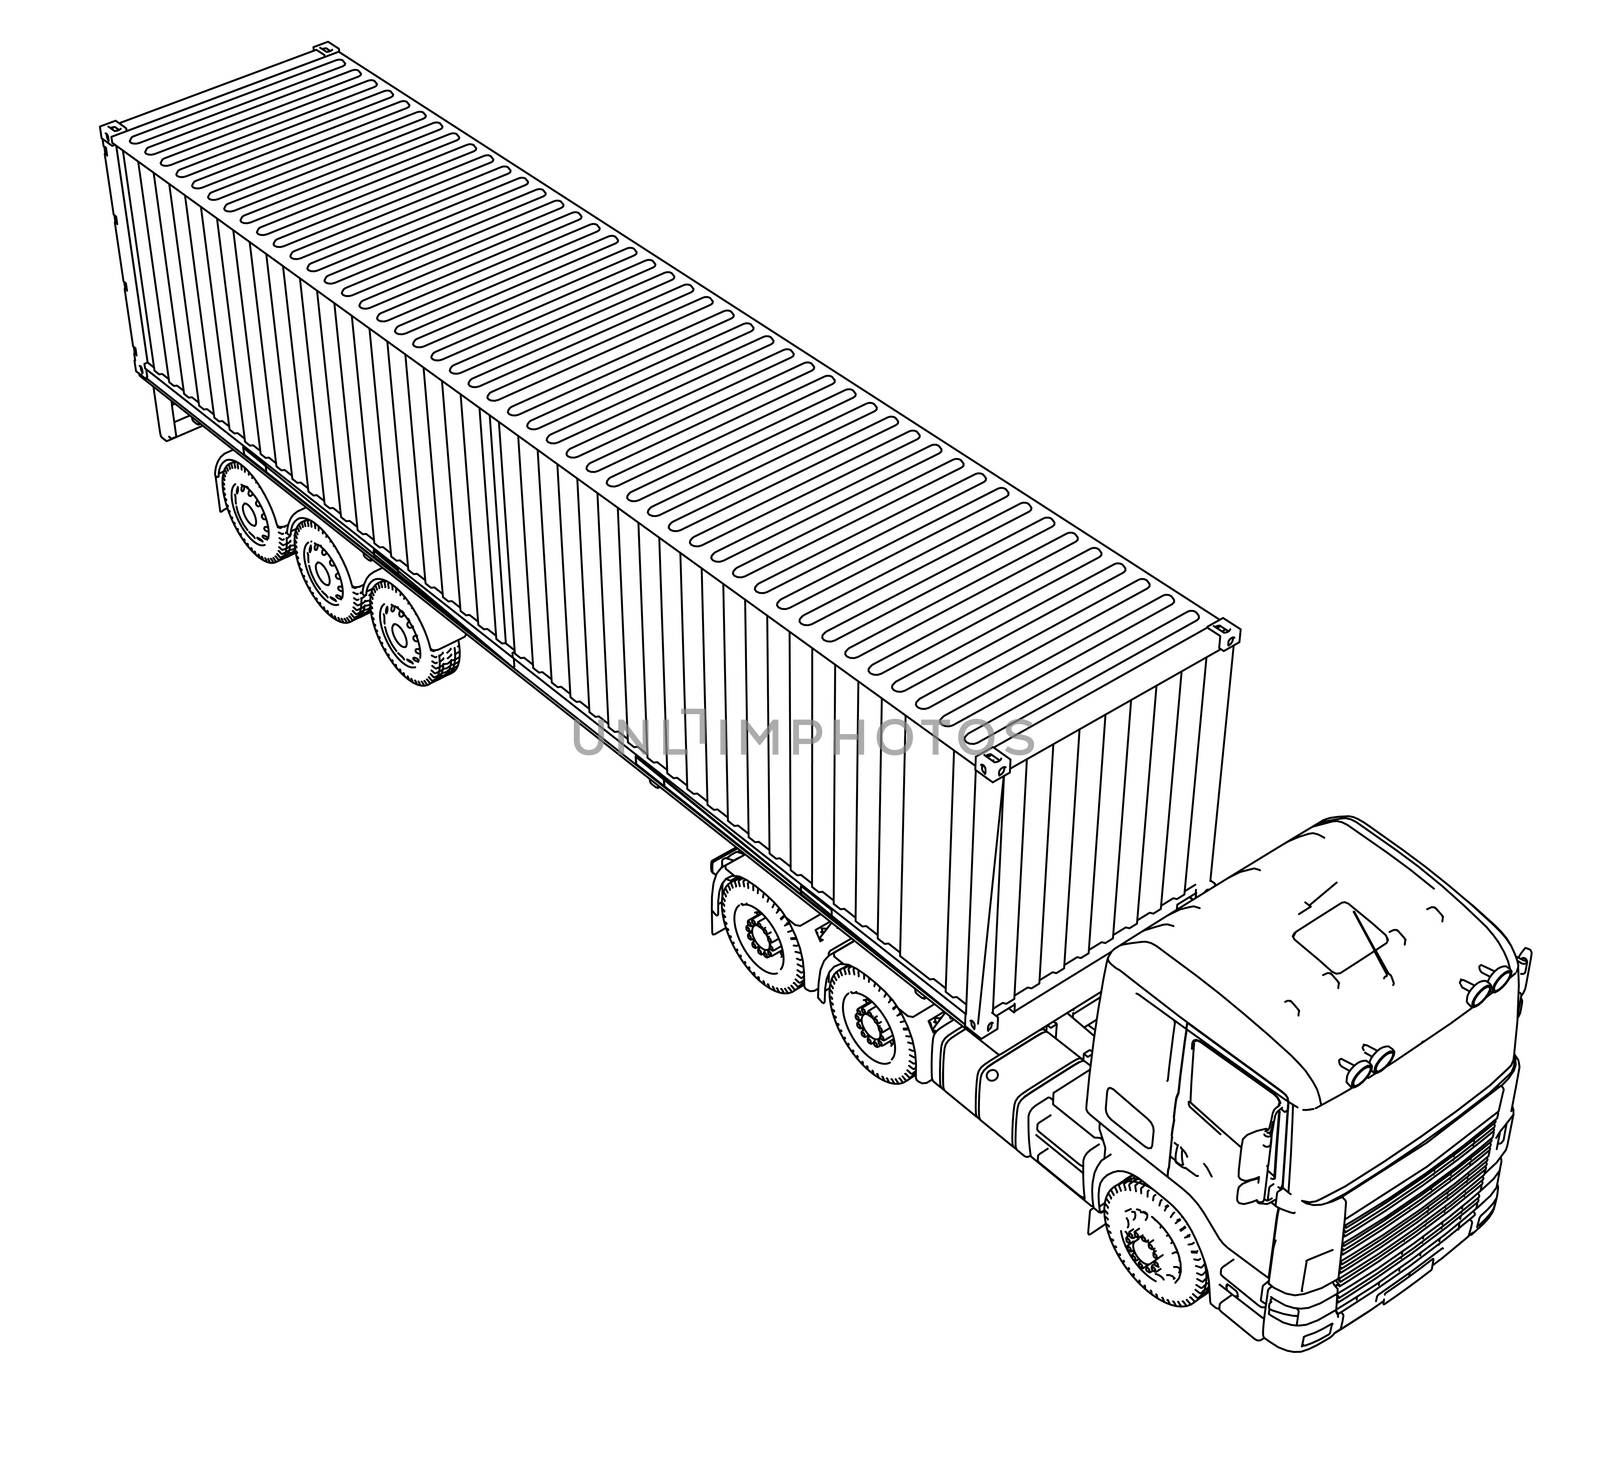 Logistic by Container truck. 3d illustration. Wire-frame style